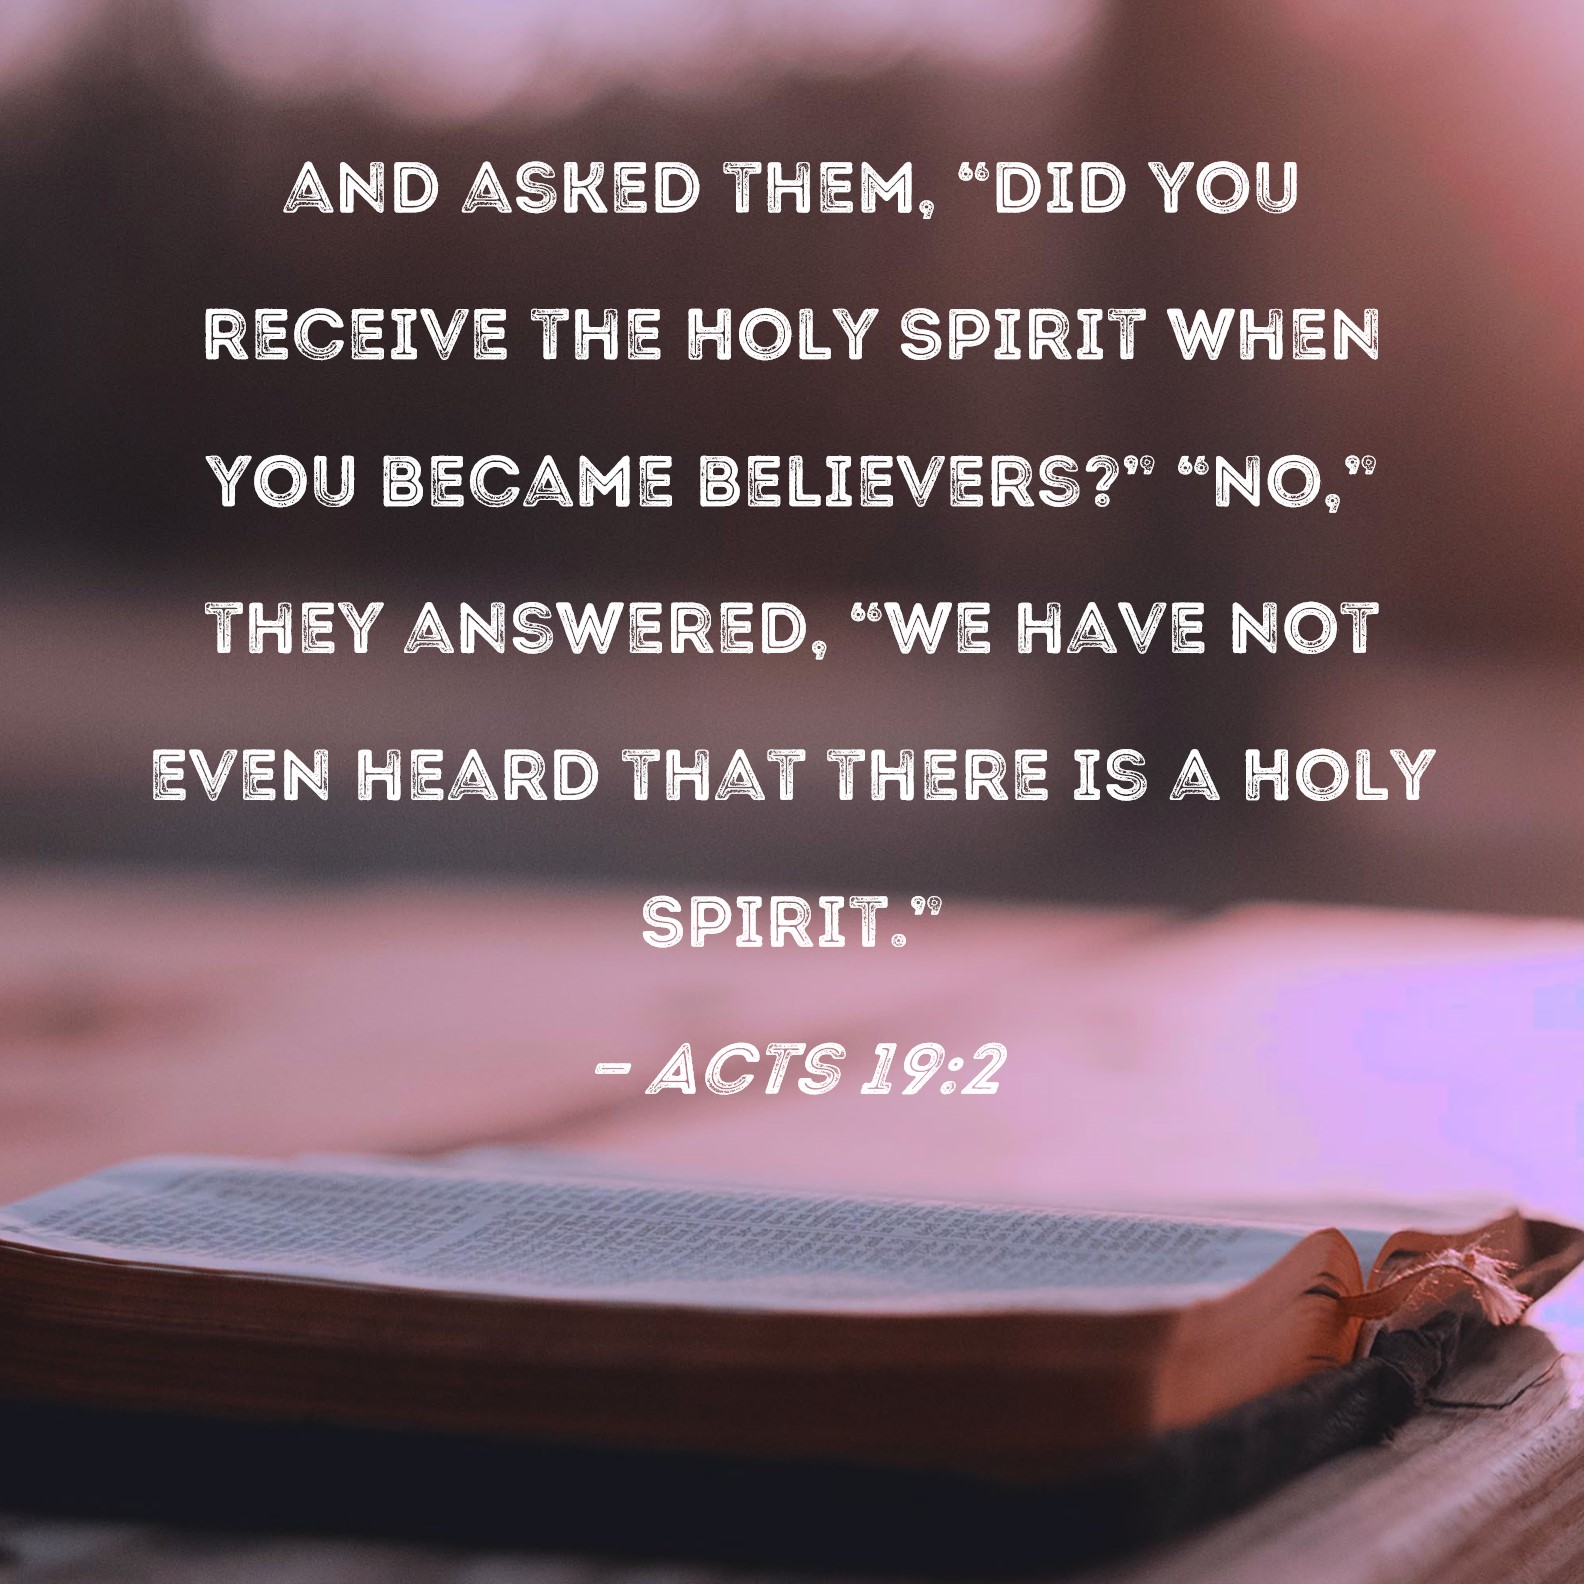 did you receive the holy spirit verse